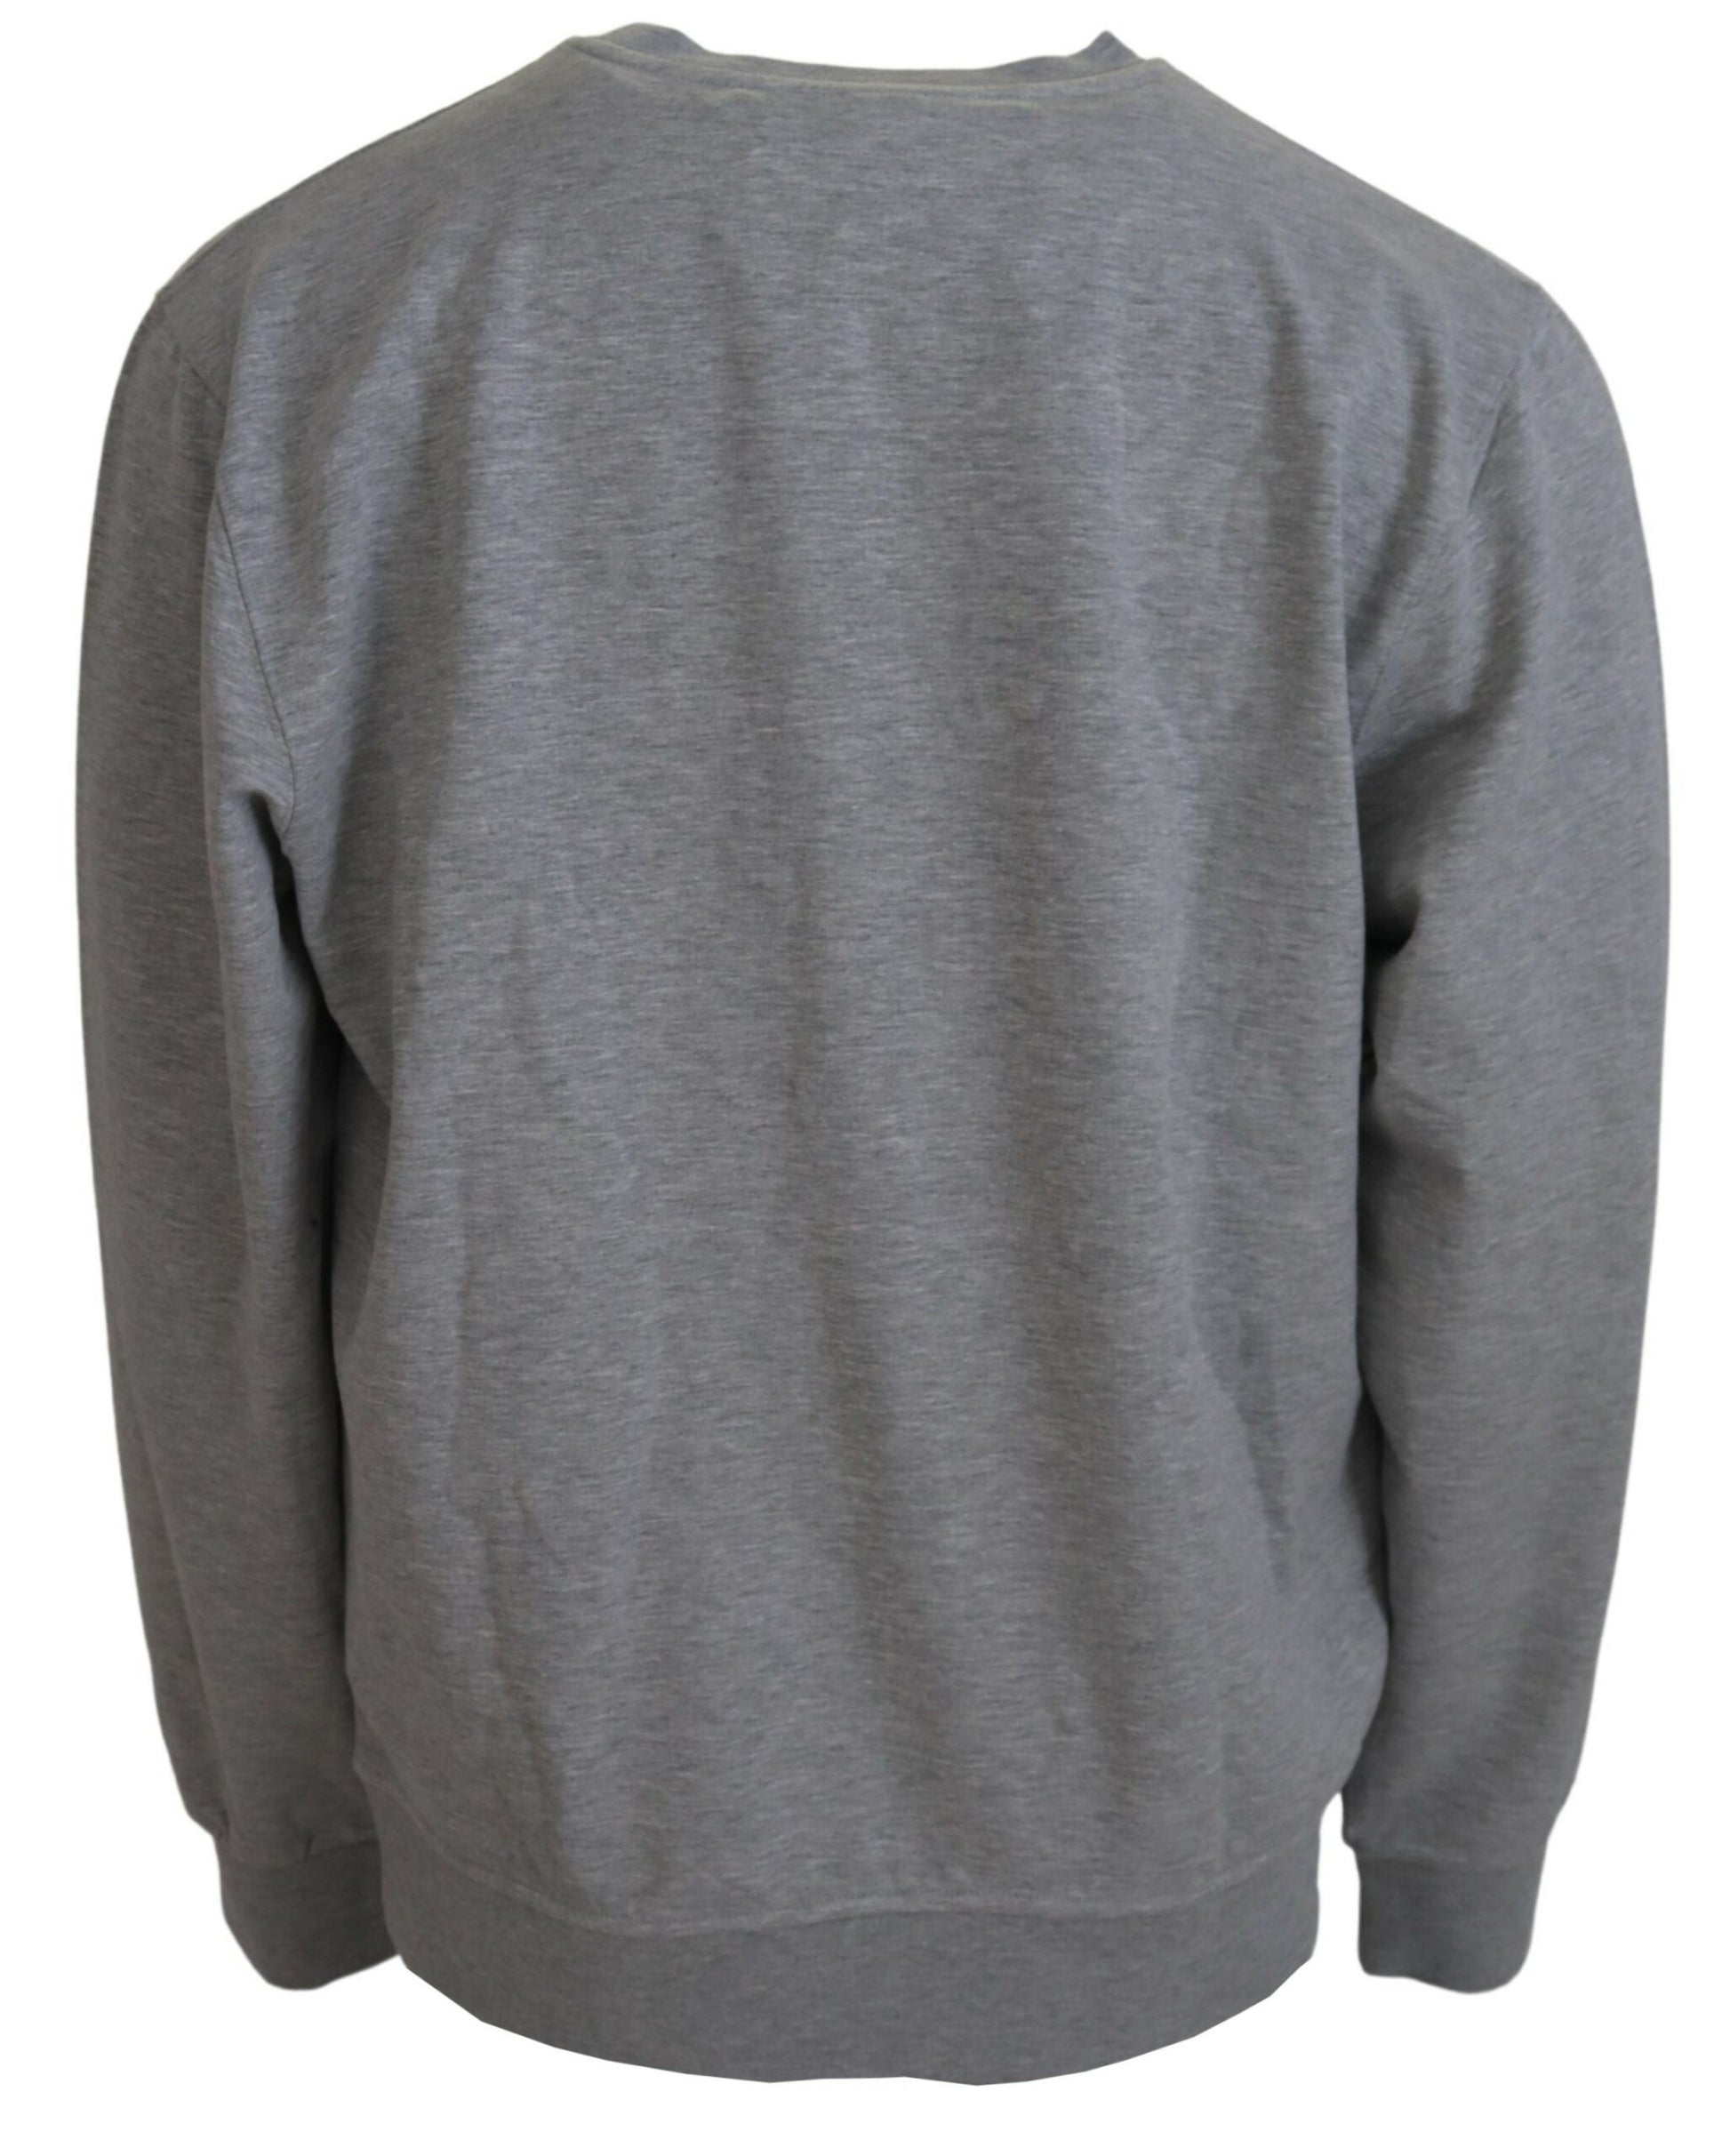 Gray Men Pullover Sweatshirt Sweater - Designed by Aeronautica Militare Available to Buy at a Discounted Price on Moon Behind The Hill Online Designer Discount Store